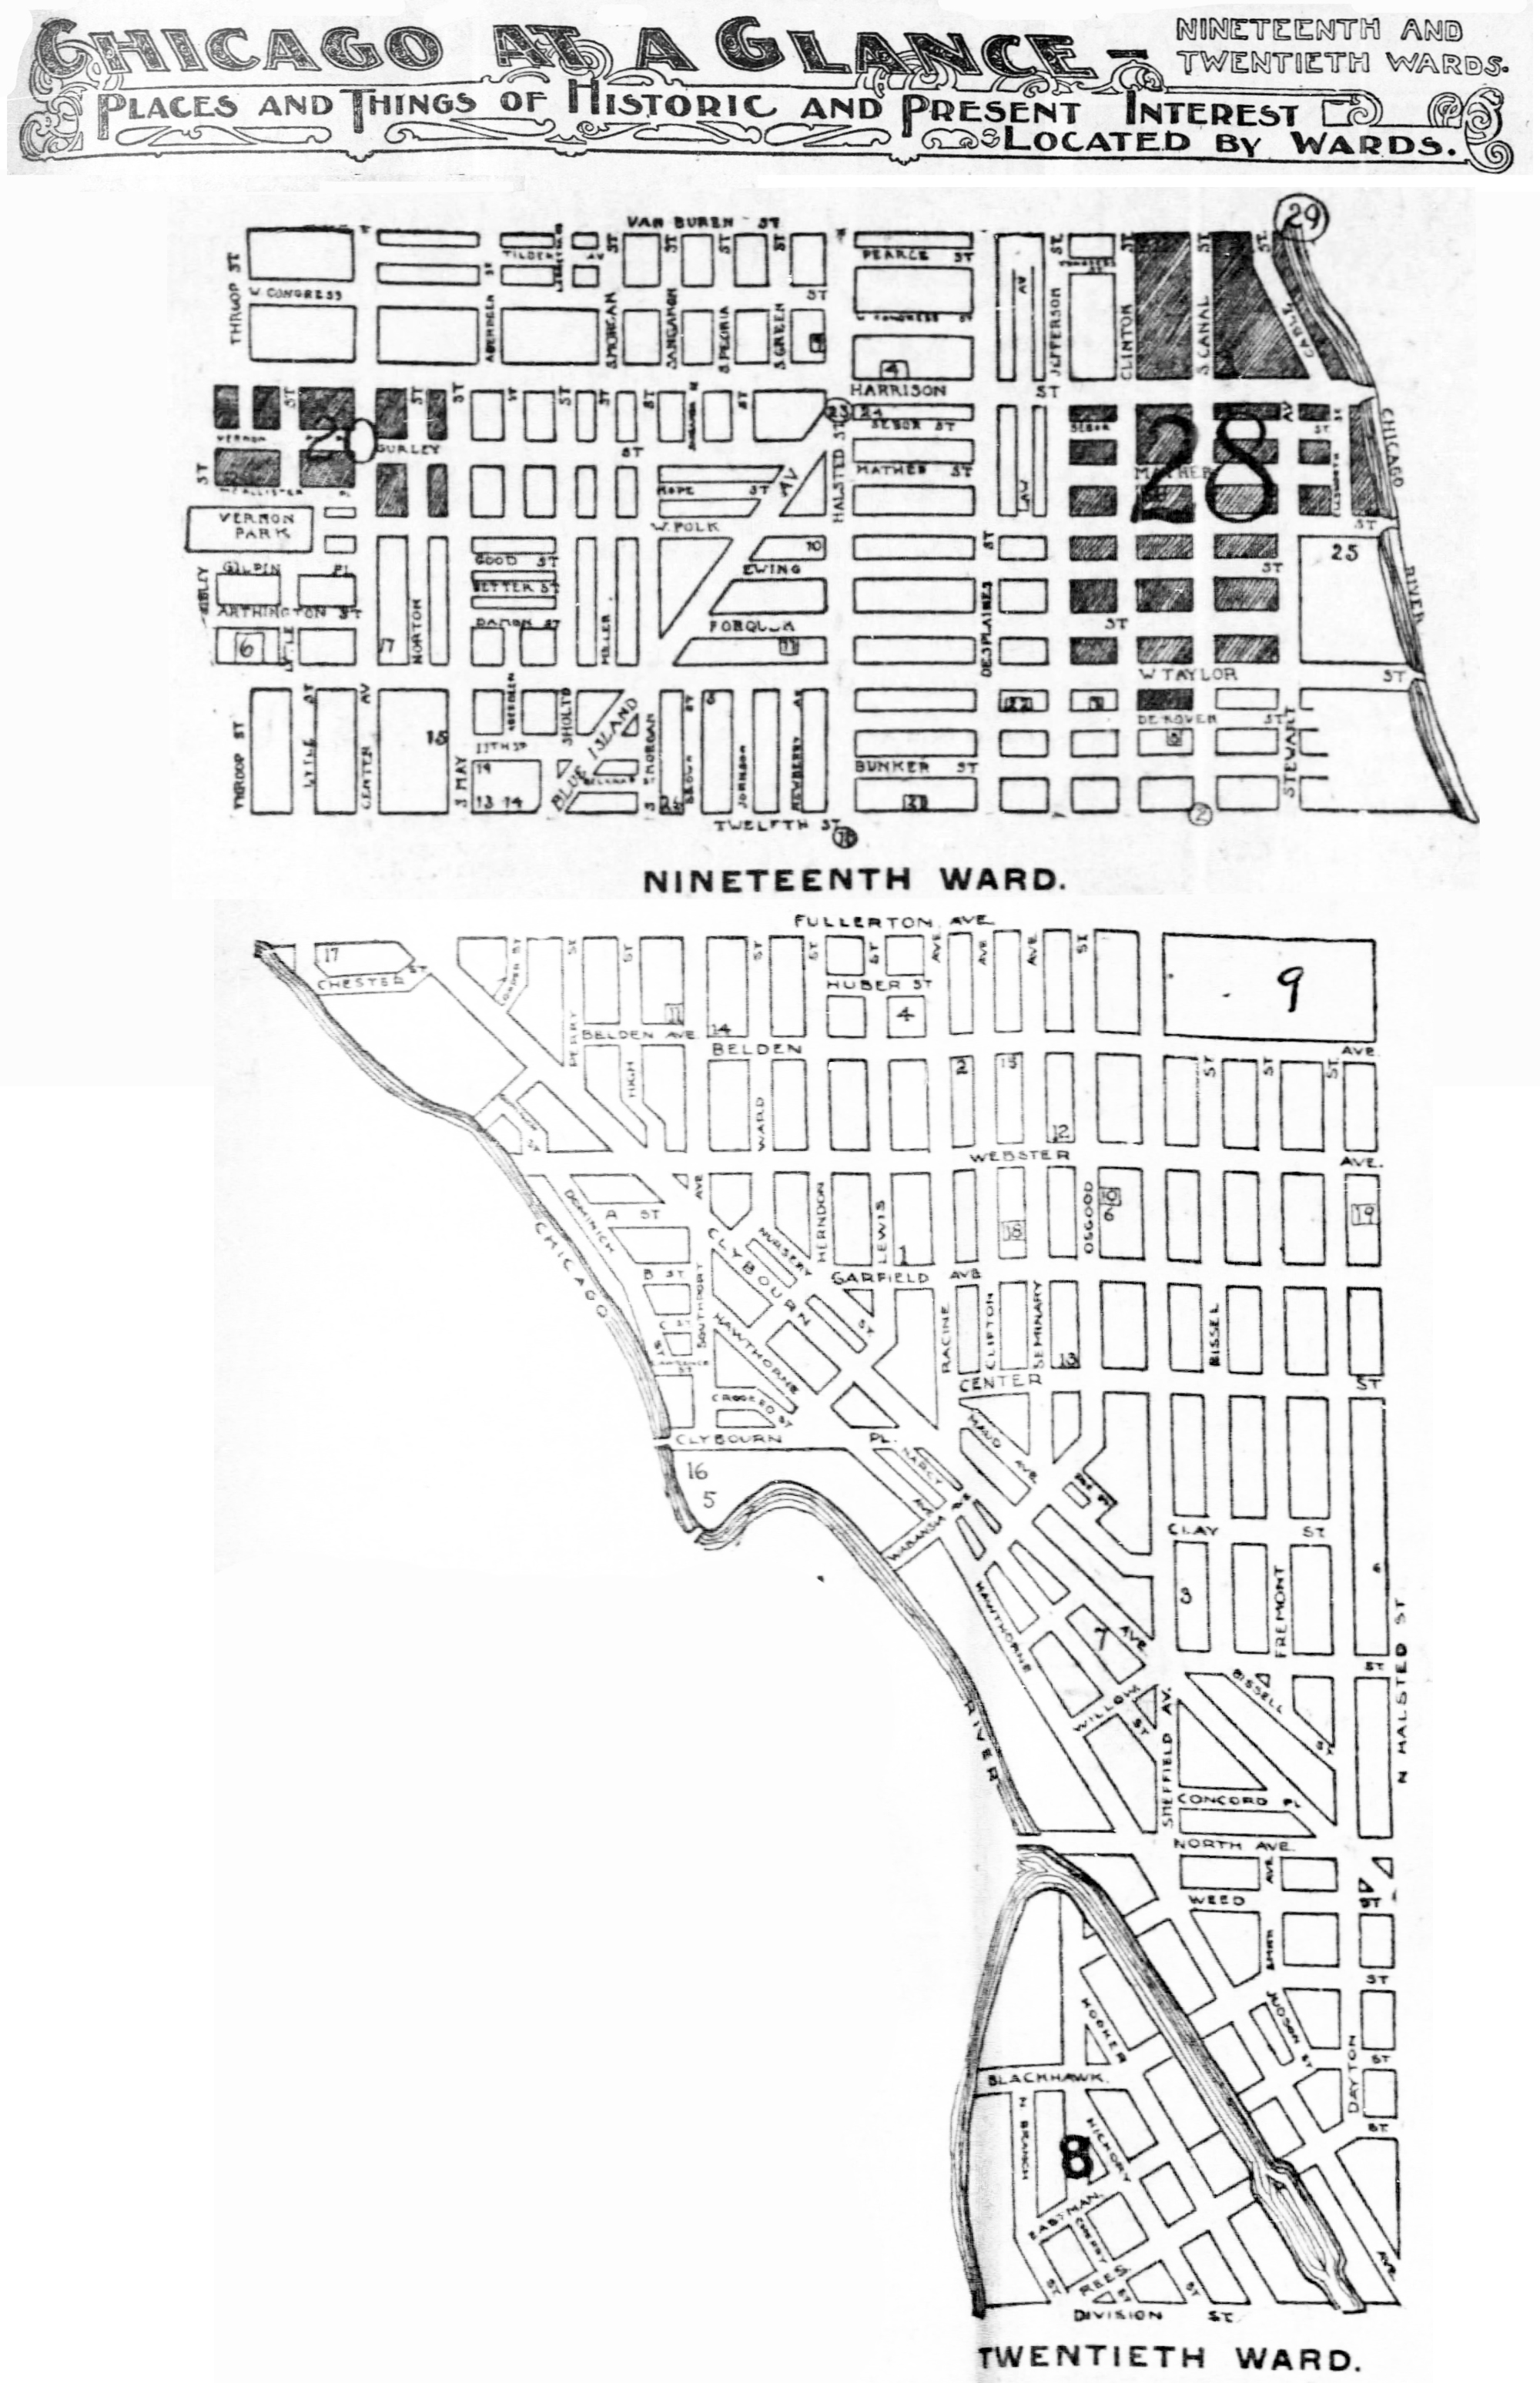 Wards Of Chicago In 1900 Part 10 19th 20th Wards